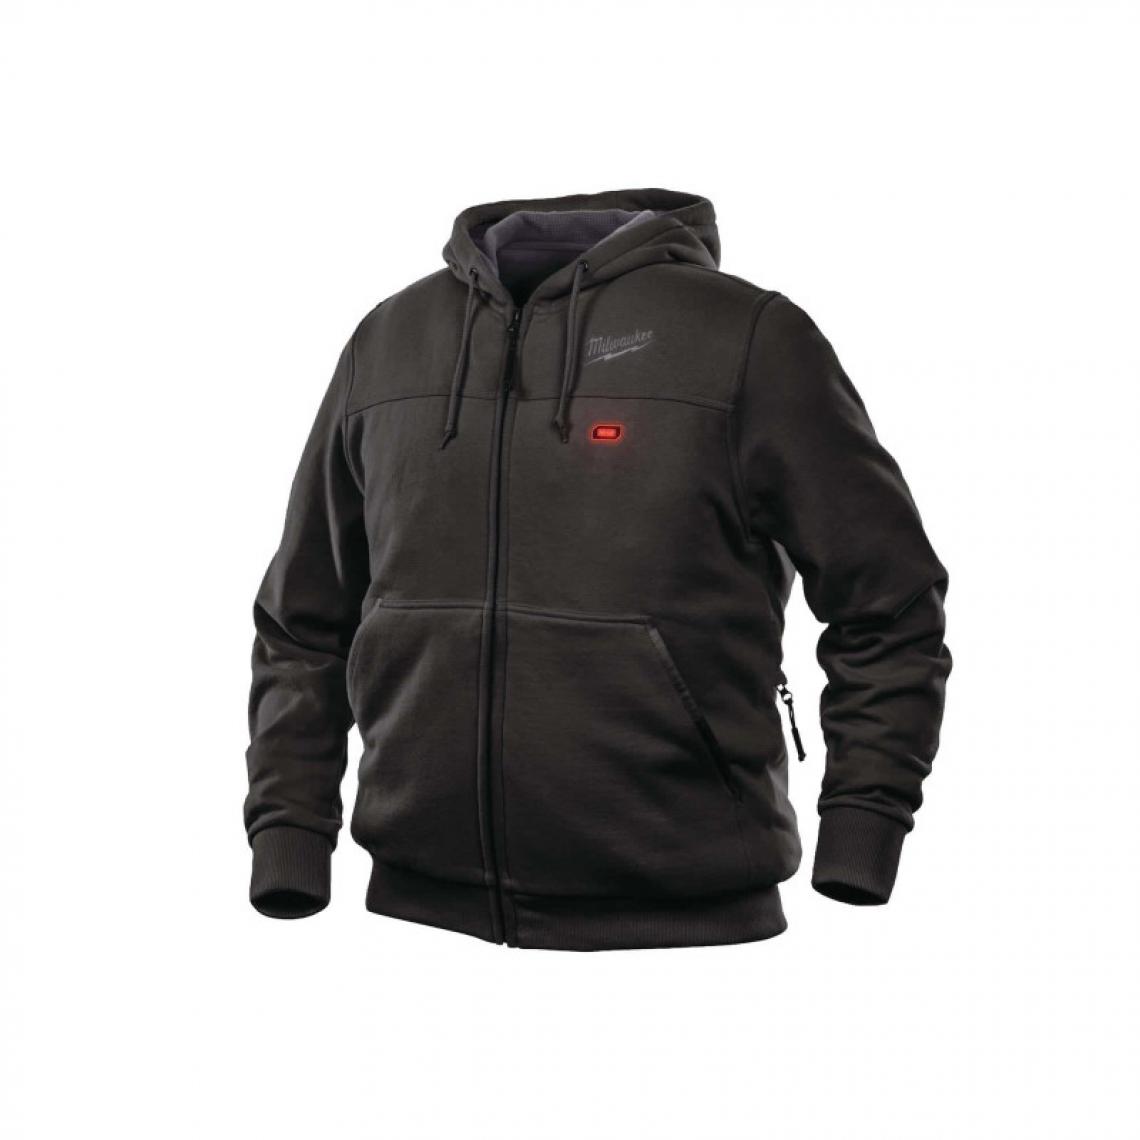 Milwaukee - Sweat chauffant Milwaukee M12 HHBL3-0 Taille XL Noir 4933464349 sans batterie ni chargeur - Protections corps